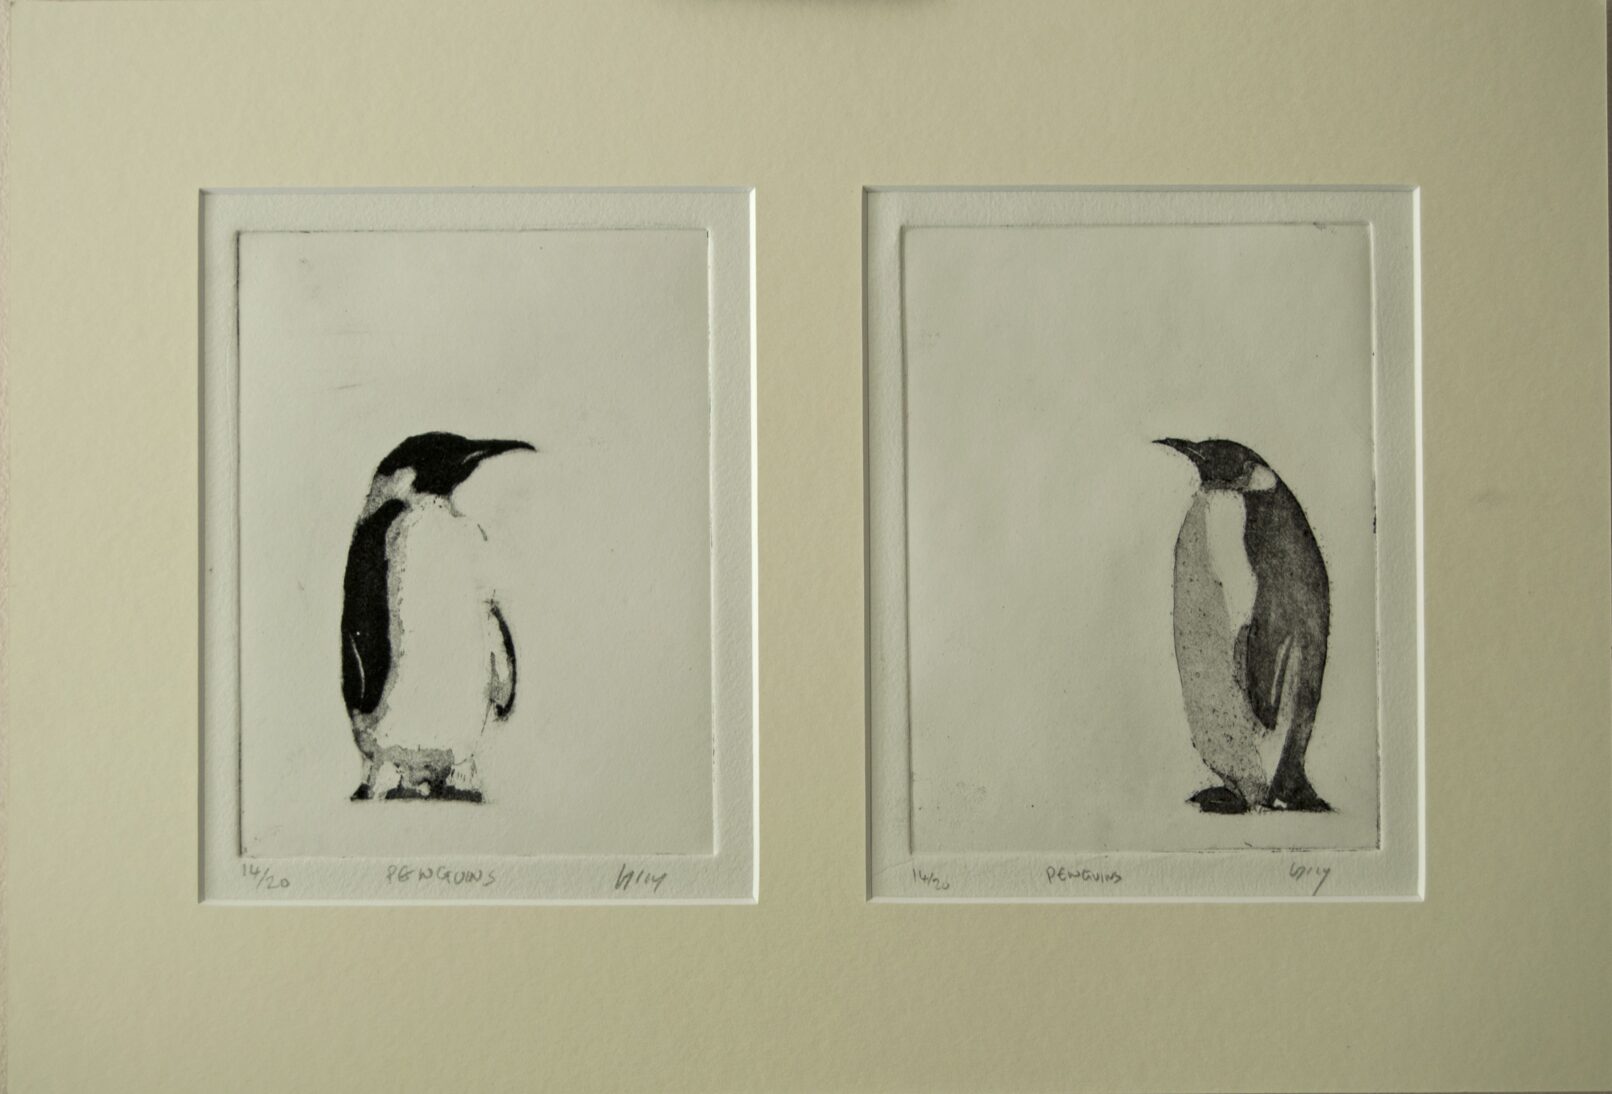 Two penguins facing each other, zinc plate etching